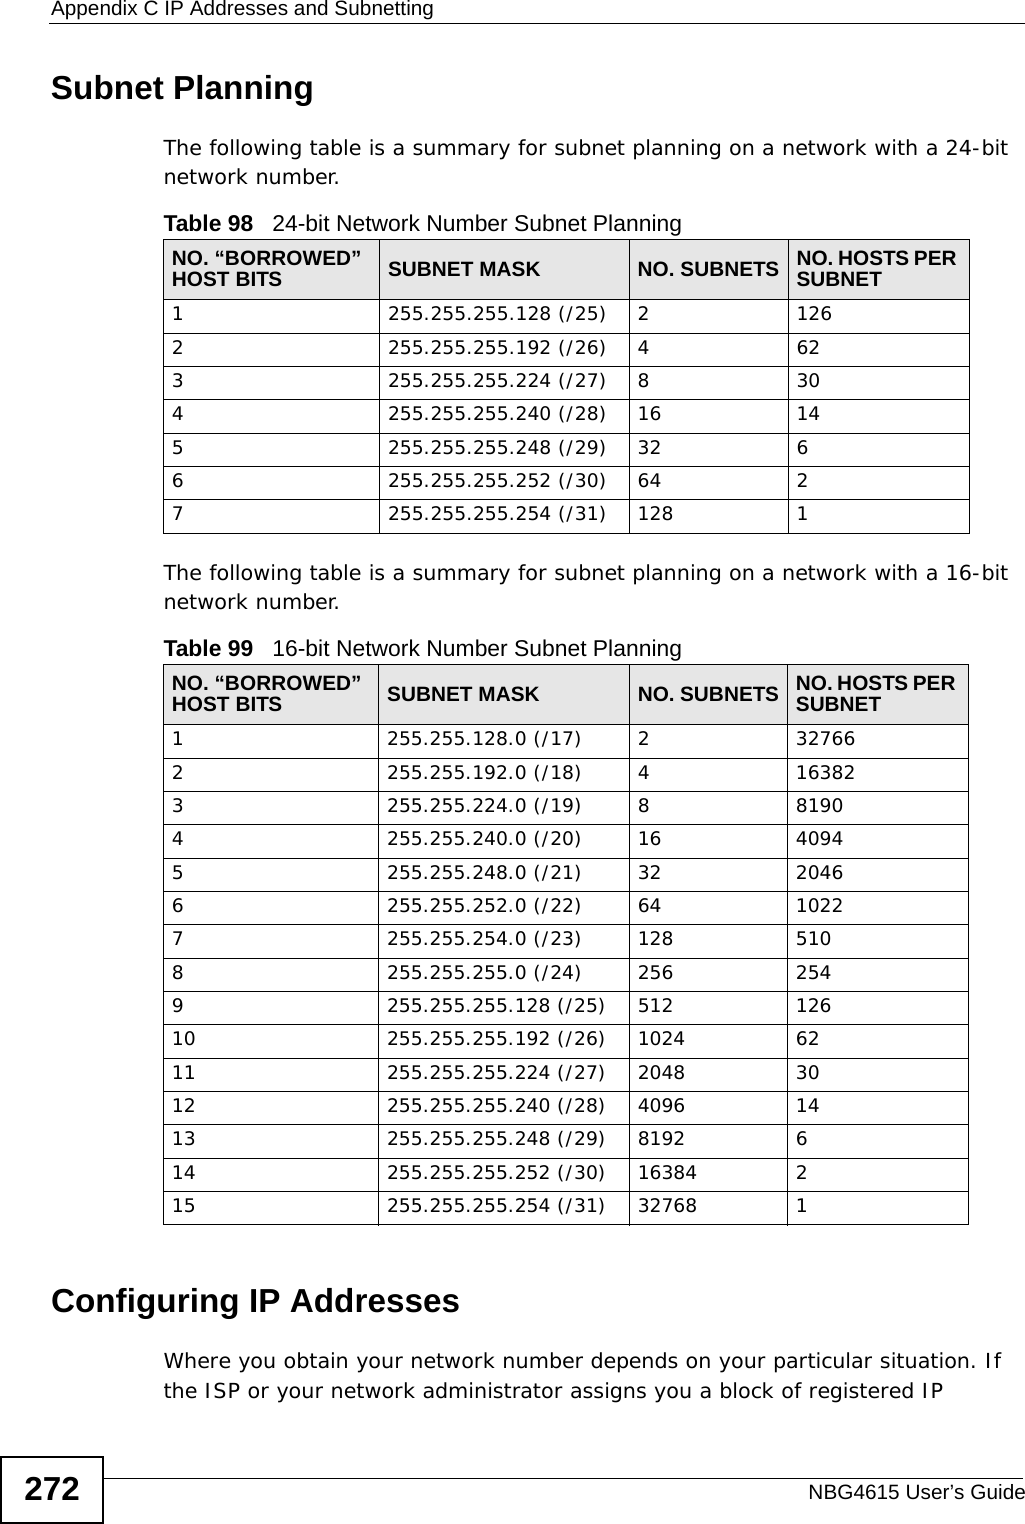 Appendix C IP Addresses and SubnettingNBG4615 User’s Guide272Subnet PlanningThe following table is a summary for subnet planning on a network with a 24-bit network number.The following table is a summary for subnet planning on a network with a 16-bit network number. Configuring IP AddressesWhere you obtain your network number depends on your particular situation. If the ISP or your network administrator assigns you a block of registered IP Table 98   24-bit Network Number Subnet PlanningNO. “BORROWED” HOST BITS SUBNET MASK NO. SUBNETS NO. HOSTS PER SUBNET1255.255.255.128 (/25) 21262255.255.255.192 (/26) 4623255.255.255.224 (/27) 8304255.255.255.240 (/28) 16 145255.255.255.248 (/29) 32 66255.255.255.252 (/30) 64 27255.255.255.254 (/31) 128 1Table 99   16-bit Network Number Subnet PlanningNO. “BORROWED” HOST BITS SUBNET MASK NO. SUBNETS NO. HOSTS PER SUBNET1255.255.128.0 (/17) 2327662255.255.192.0 (/18) 4163823255.255.224.0 (/19) 881904255.255.240.0 (/20) 16 40945255.255.248.0 (/21) 32 20466255.255.252.0 (/22) 64 10227255.255.254.0 (/23) 128 5108255.255.255.0 (/24) 256 2549255.255.255.128 (/25) 512 12610 255.255.255.192 (/26) 1024 6211 255.255.255.224 (/27) 2048 3012 255.255.255.240 (/28) 4096 1413 255.255.255.248 (/29) 8192 614 255.255.255.252 (/30) 16384 215 255.255.255.254 (/31) 32768 1